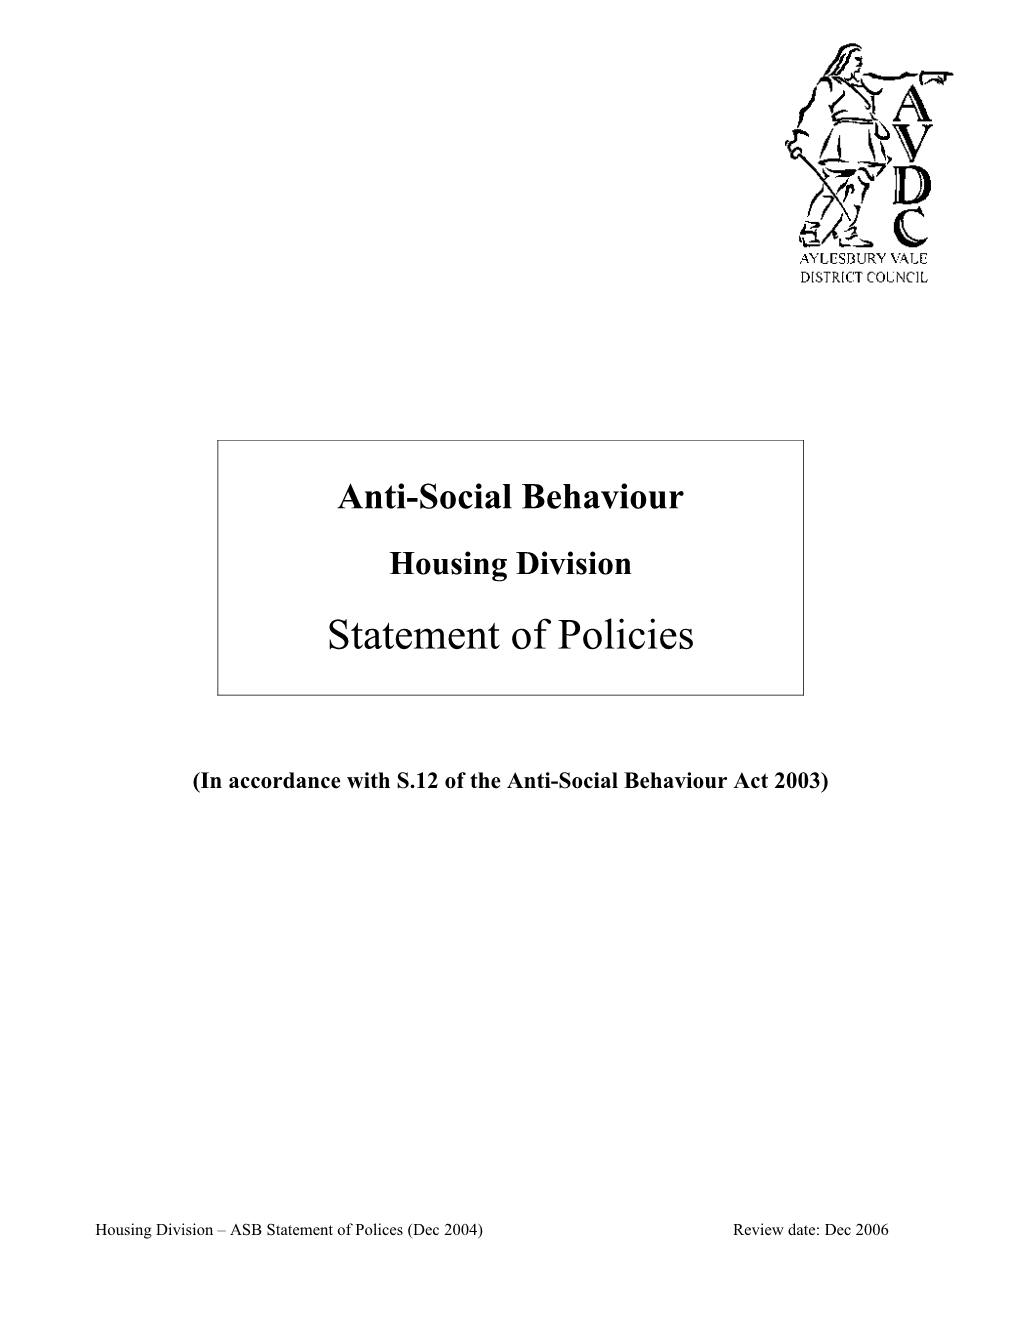 Statement of Policy & Procedures on Anti Social Behaviour